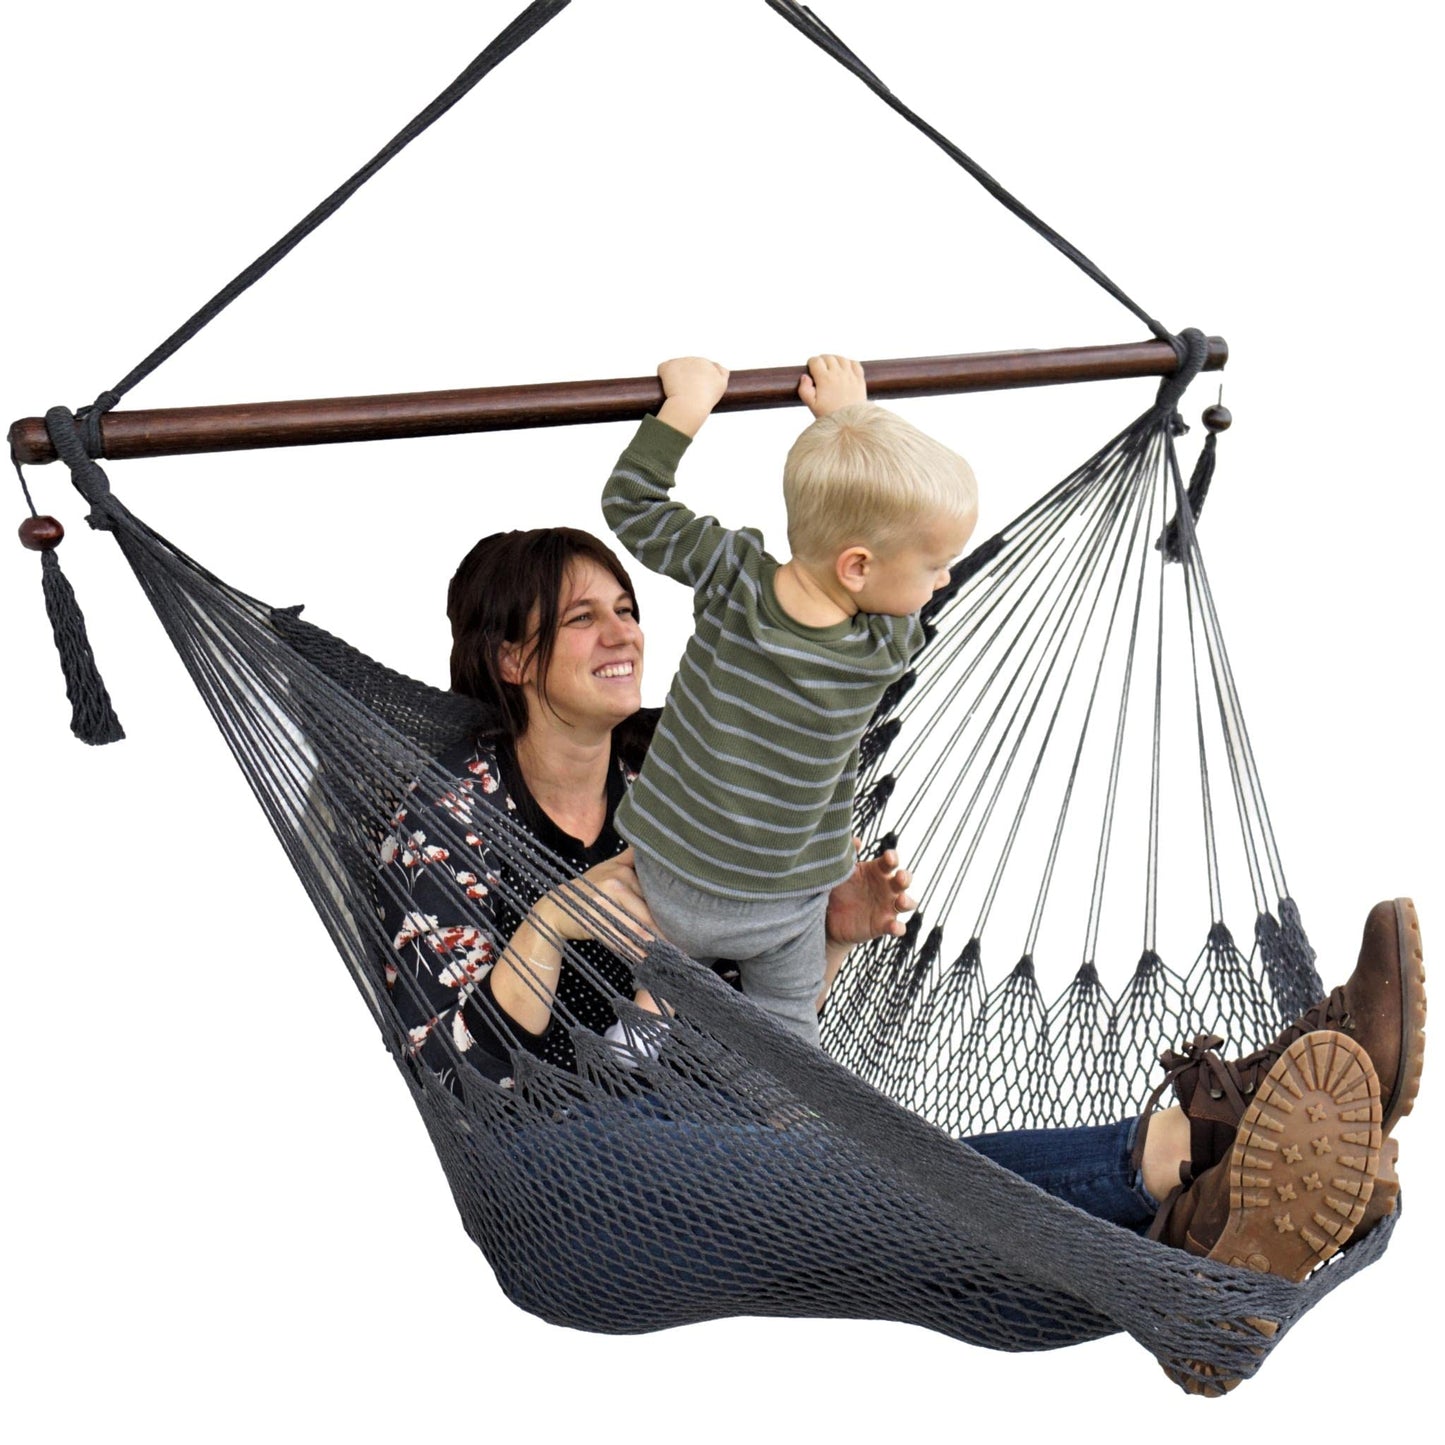 Fernweh4u Extra Large Caribbean Hammock Chair | XL String Porch Hammock Swing Chair Perfect for Both Outdoors & Indoors | Soft, Comfy & Durable Hanging Swing Chair | 48 in - Dark Grey